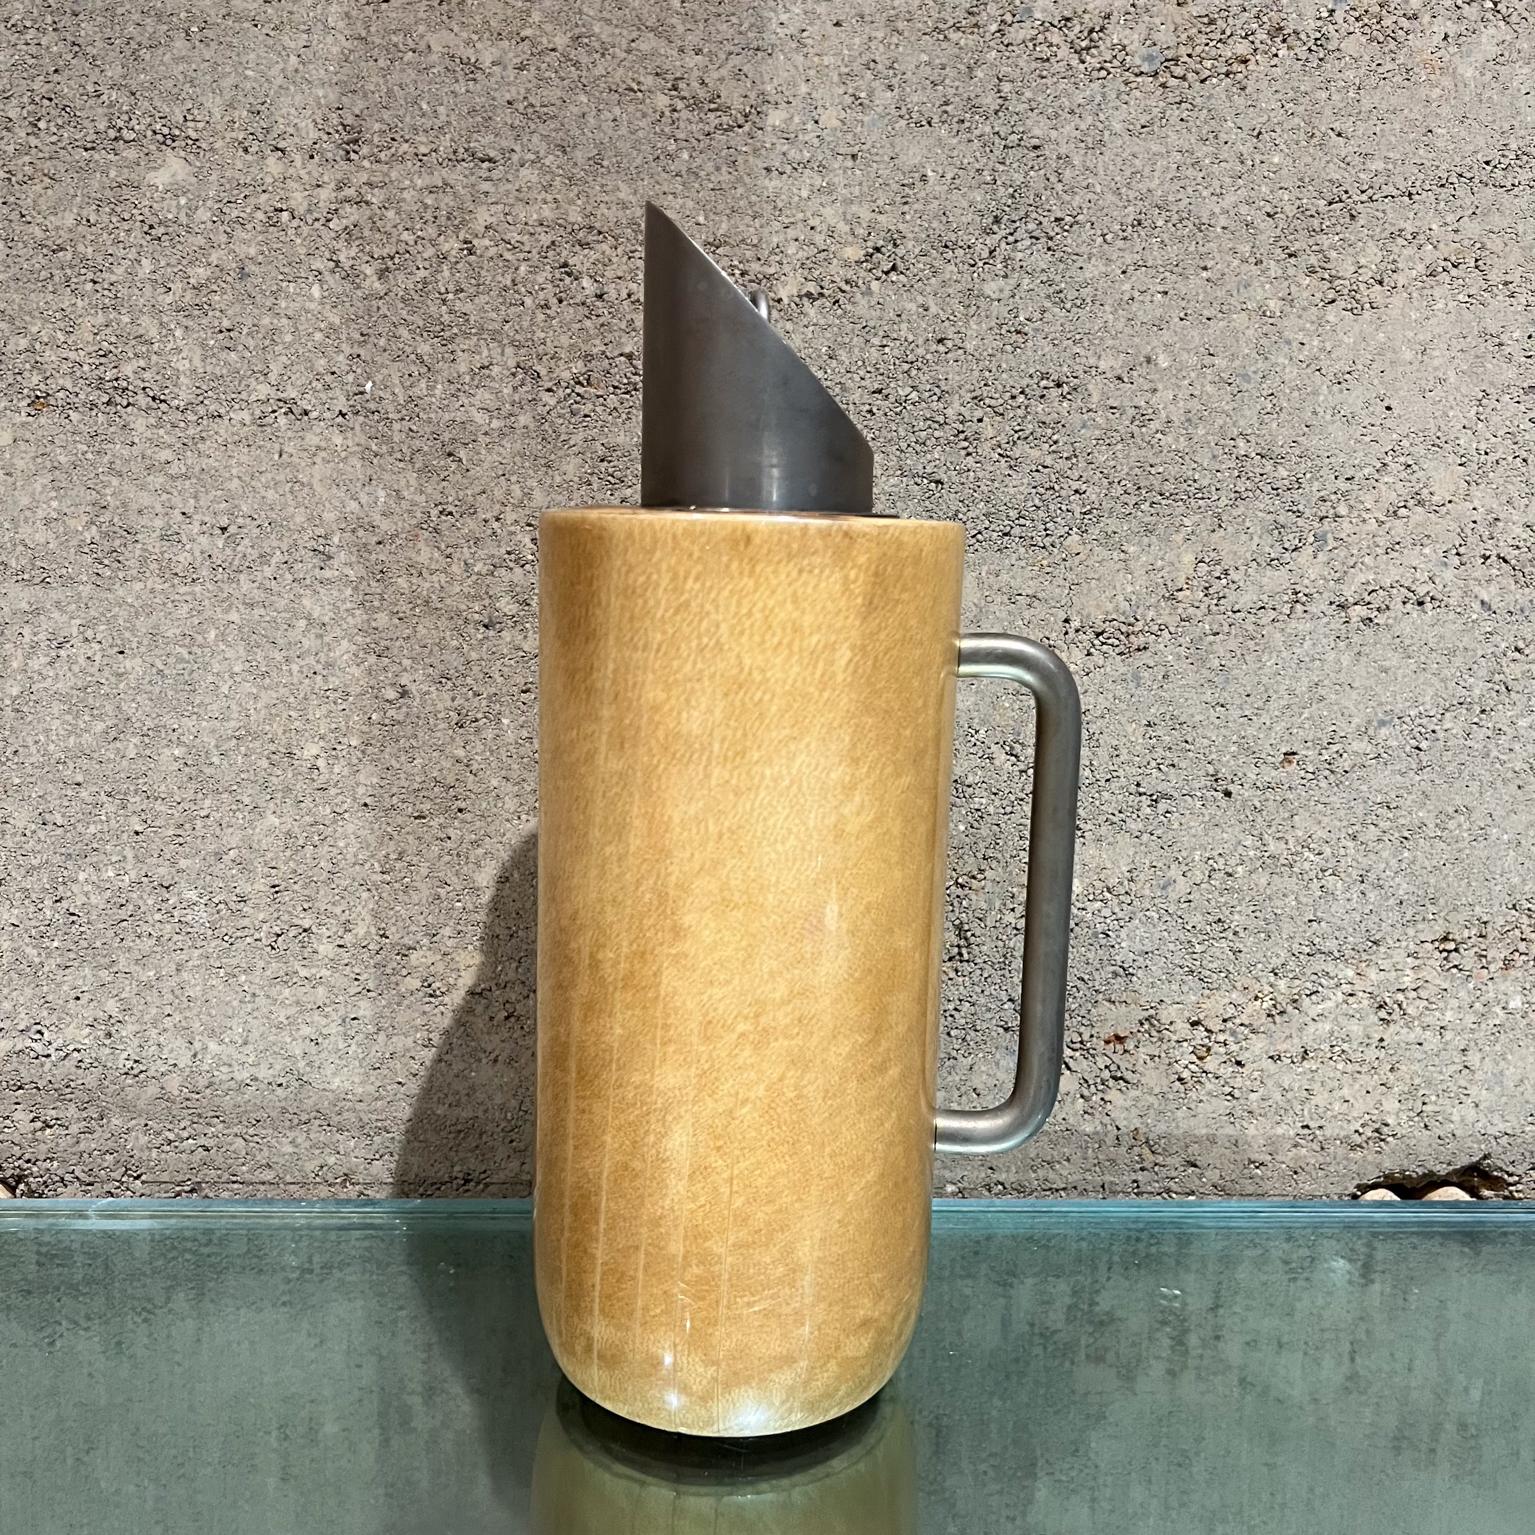 AMBIANIC presents 
1950s Aldo Tura Modern Pitcher Carafe Thermos Goatskin Italy
Goatskin and metal
Missing original label.
12 h x 6 d x 4 diameter
Preowned original unrestored vintage condition. 
Wear and stains on the top.
Refer to all images for